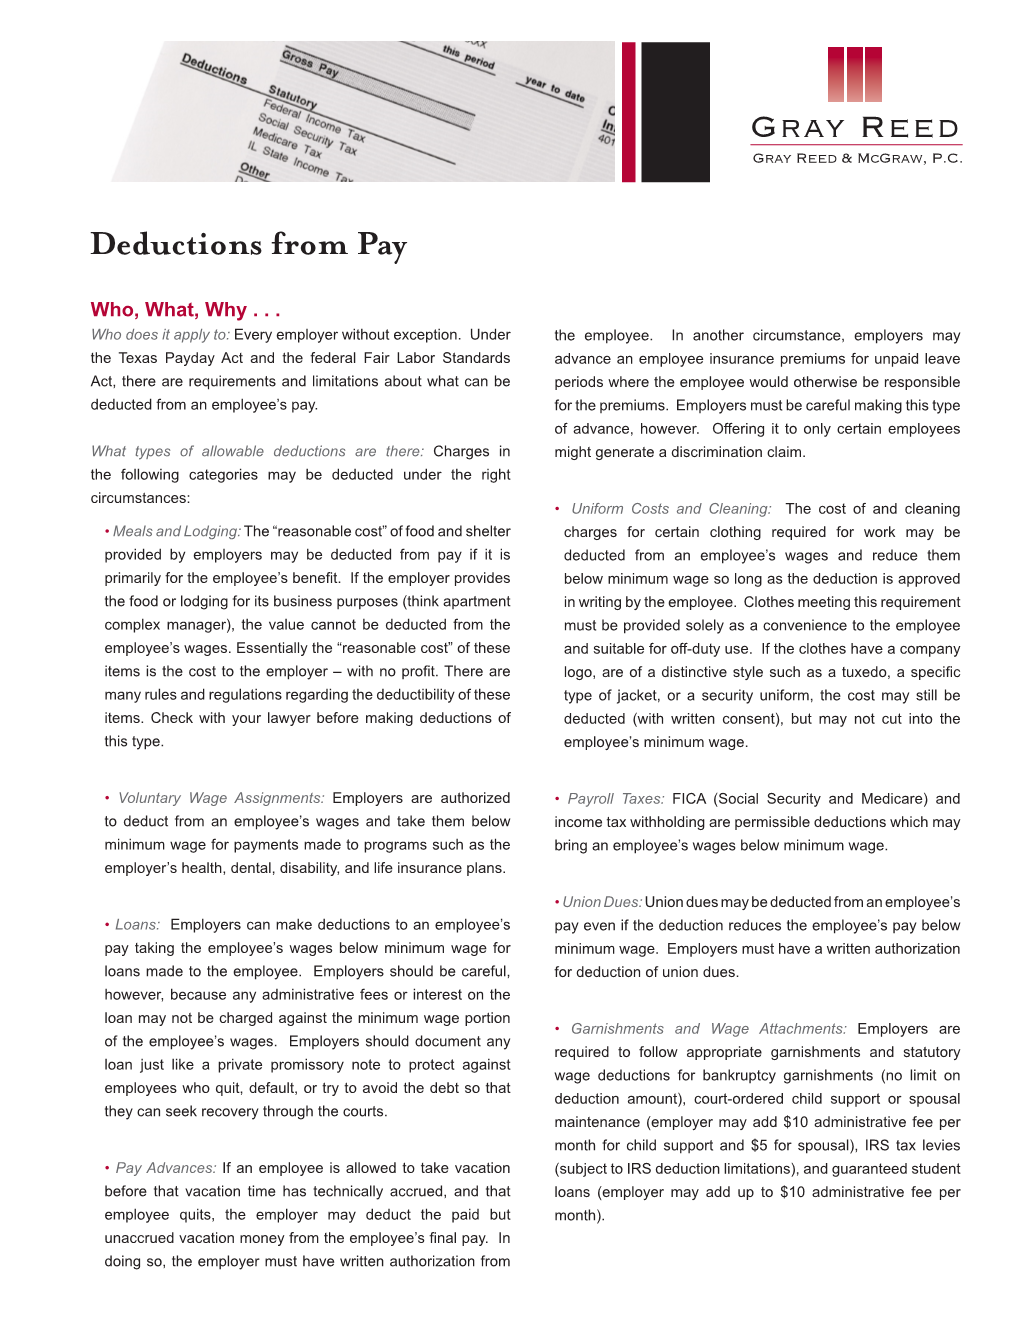 Deductions from Pay